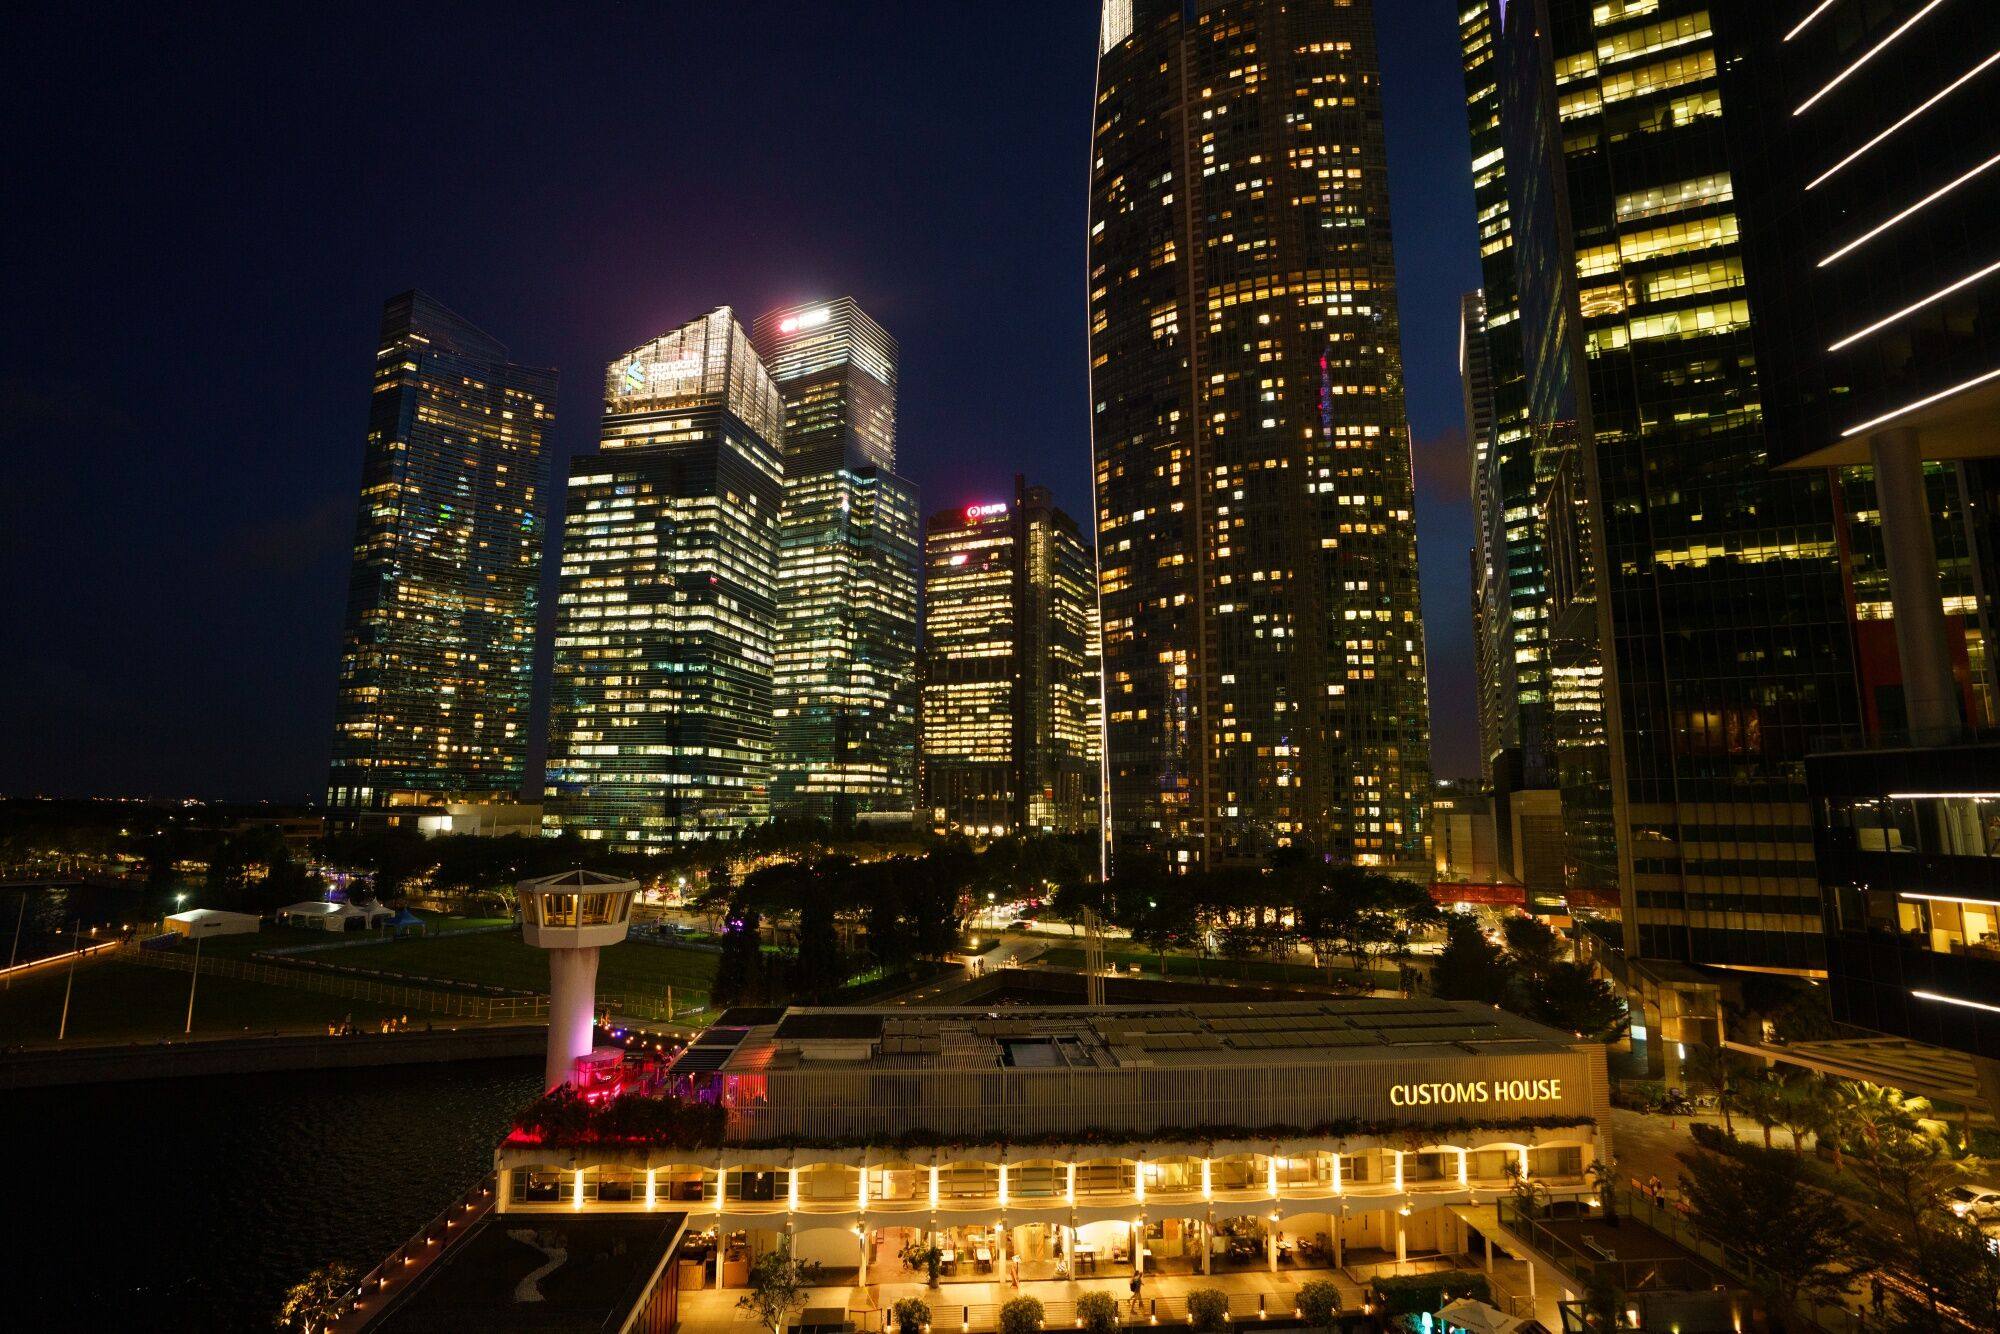 Singapore’s central business district. A married man admitted beating his girlfriend to death after learning she had multiple sexual partners. Photo: Bloomberg